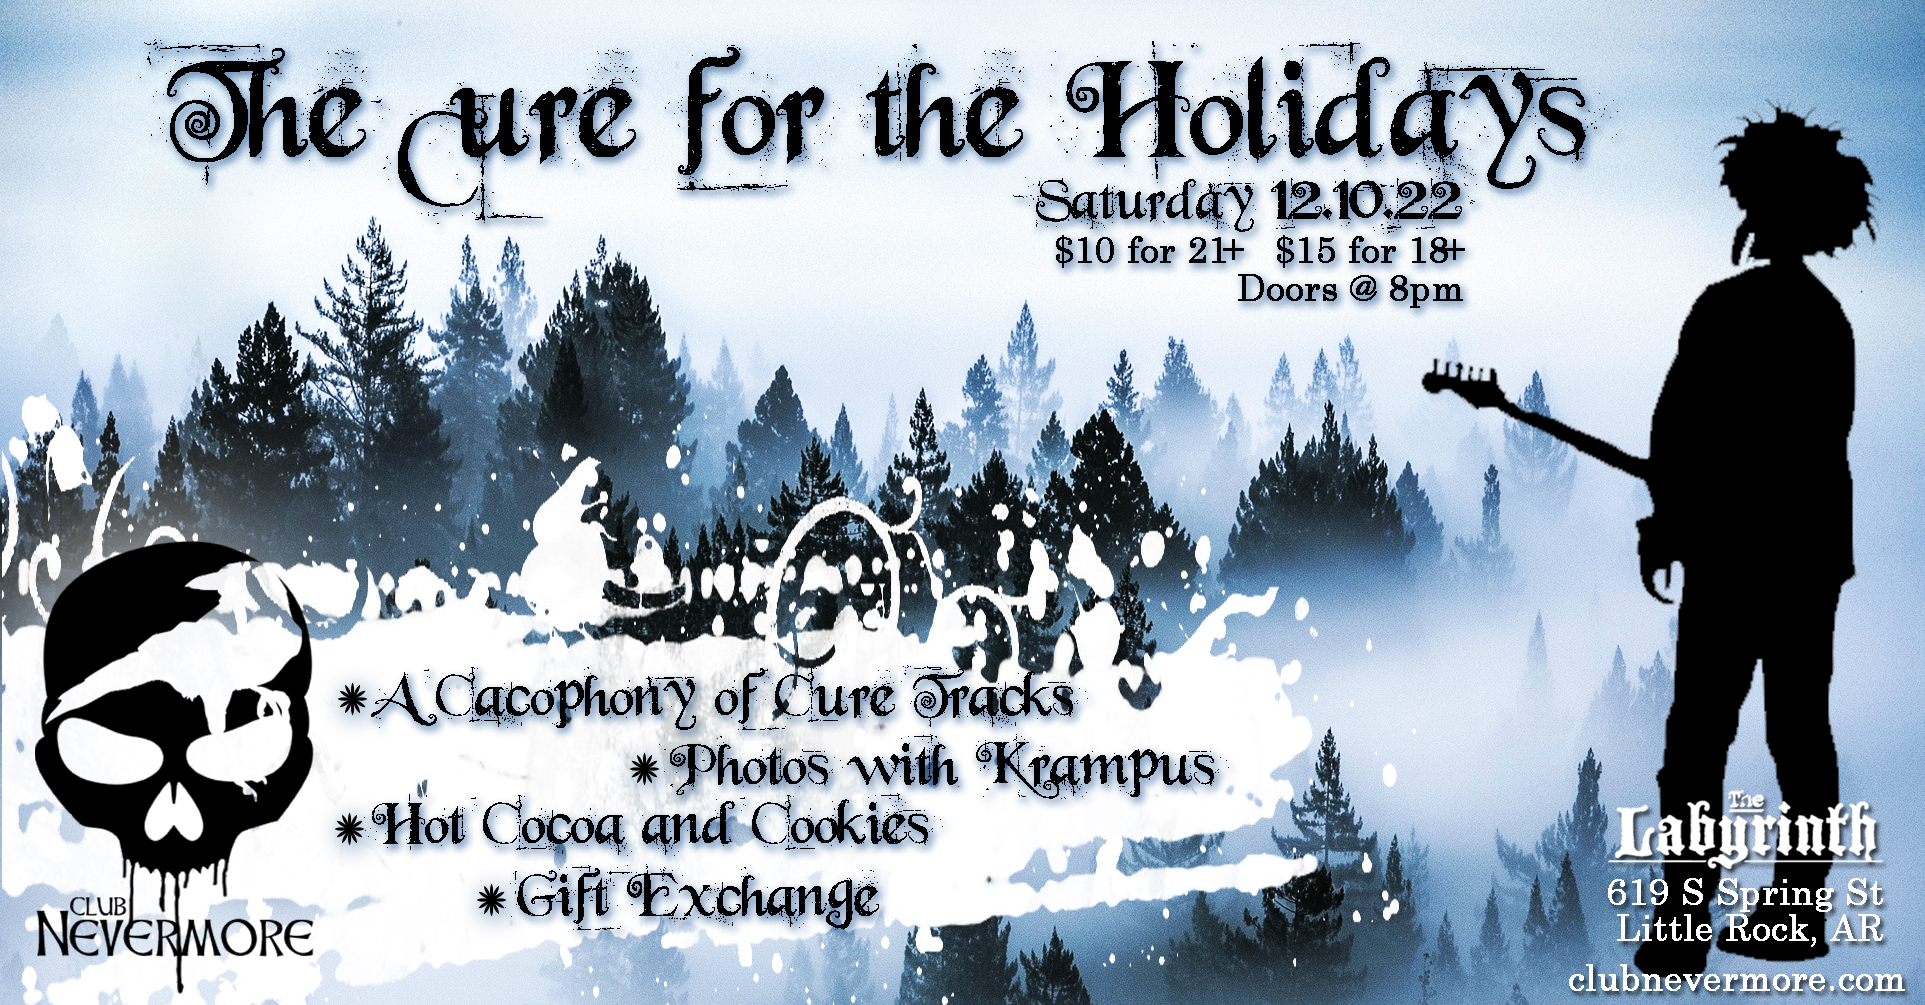 Flyer for Club Nevermore&rsquo;s Cure For the Holidays event. Saturday, December 10, 2022 at The Labyrinth, 619 South Spring Street, Little Rock, Arkansas. This has an image of a snow-covered forest in the background. In the foreground, on the right, is a silhouette of Robert Smith holding a guitar. The text says, &lsquo;A cacophony of Cure tracks. Photos with Krampus. Hot cocoa and cookies. Gift exchange. Doors at 8 PM. $15 for 18+, $10 for 21+. More details at Club Nevermore.&rsquo;